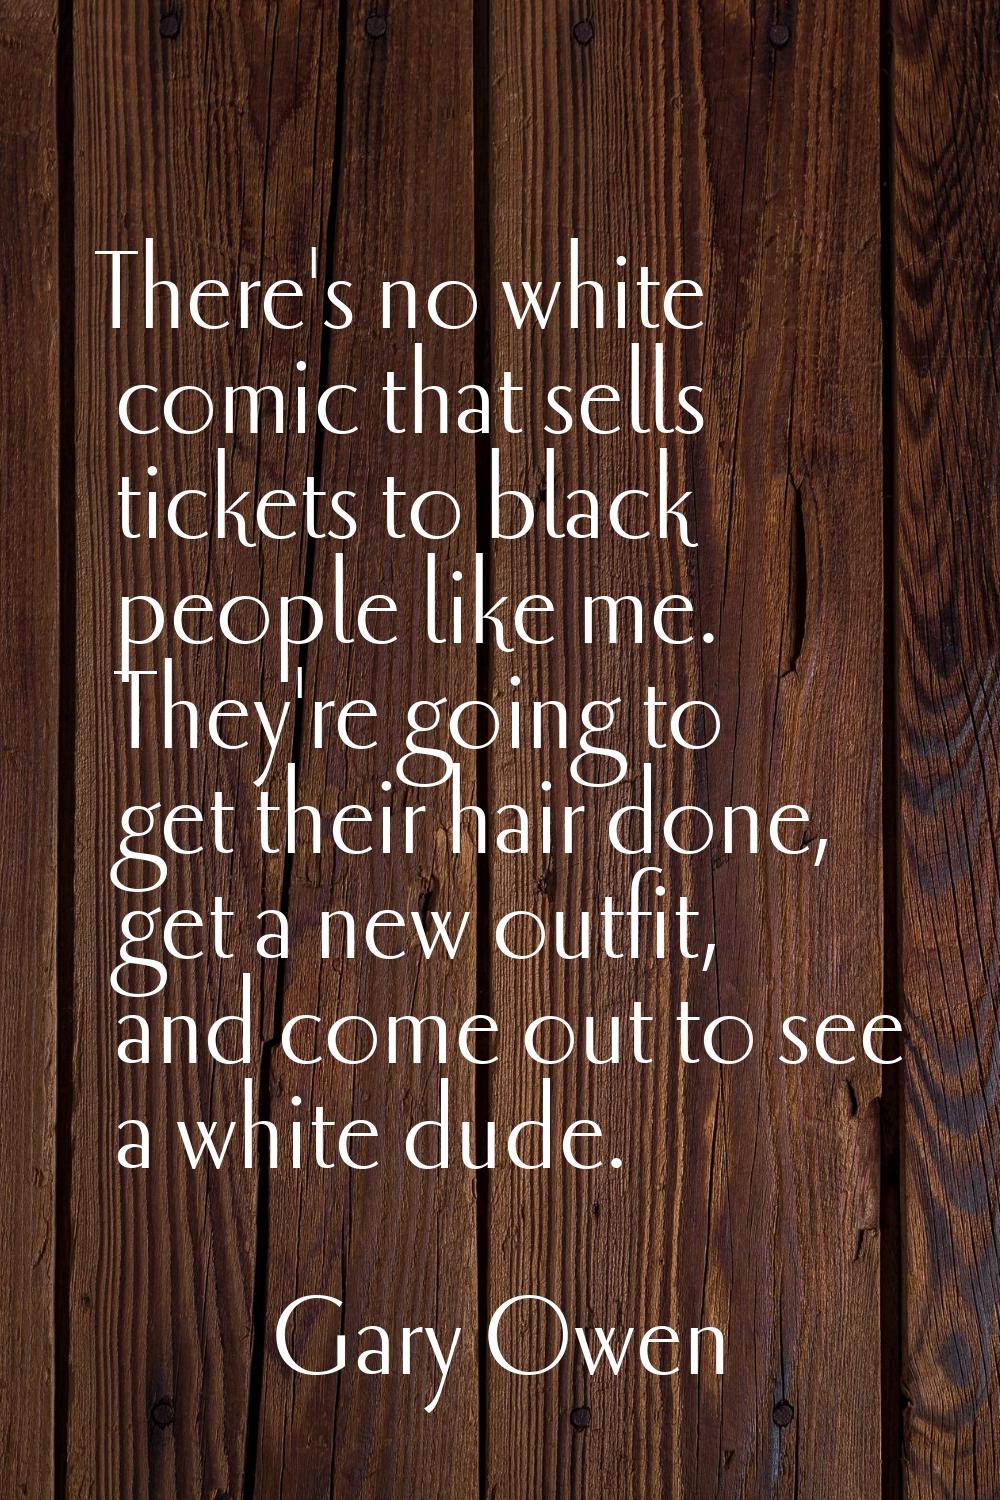 There's no white comic that sells tickets to black people like me. They're going to get their hair 